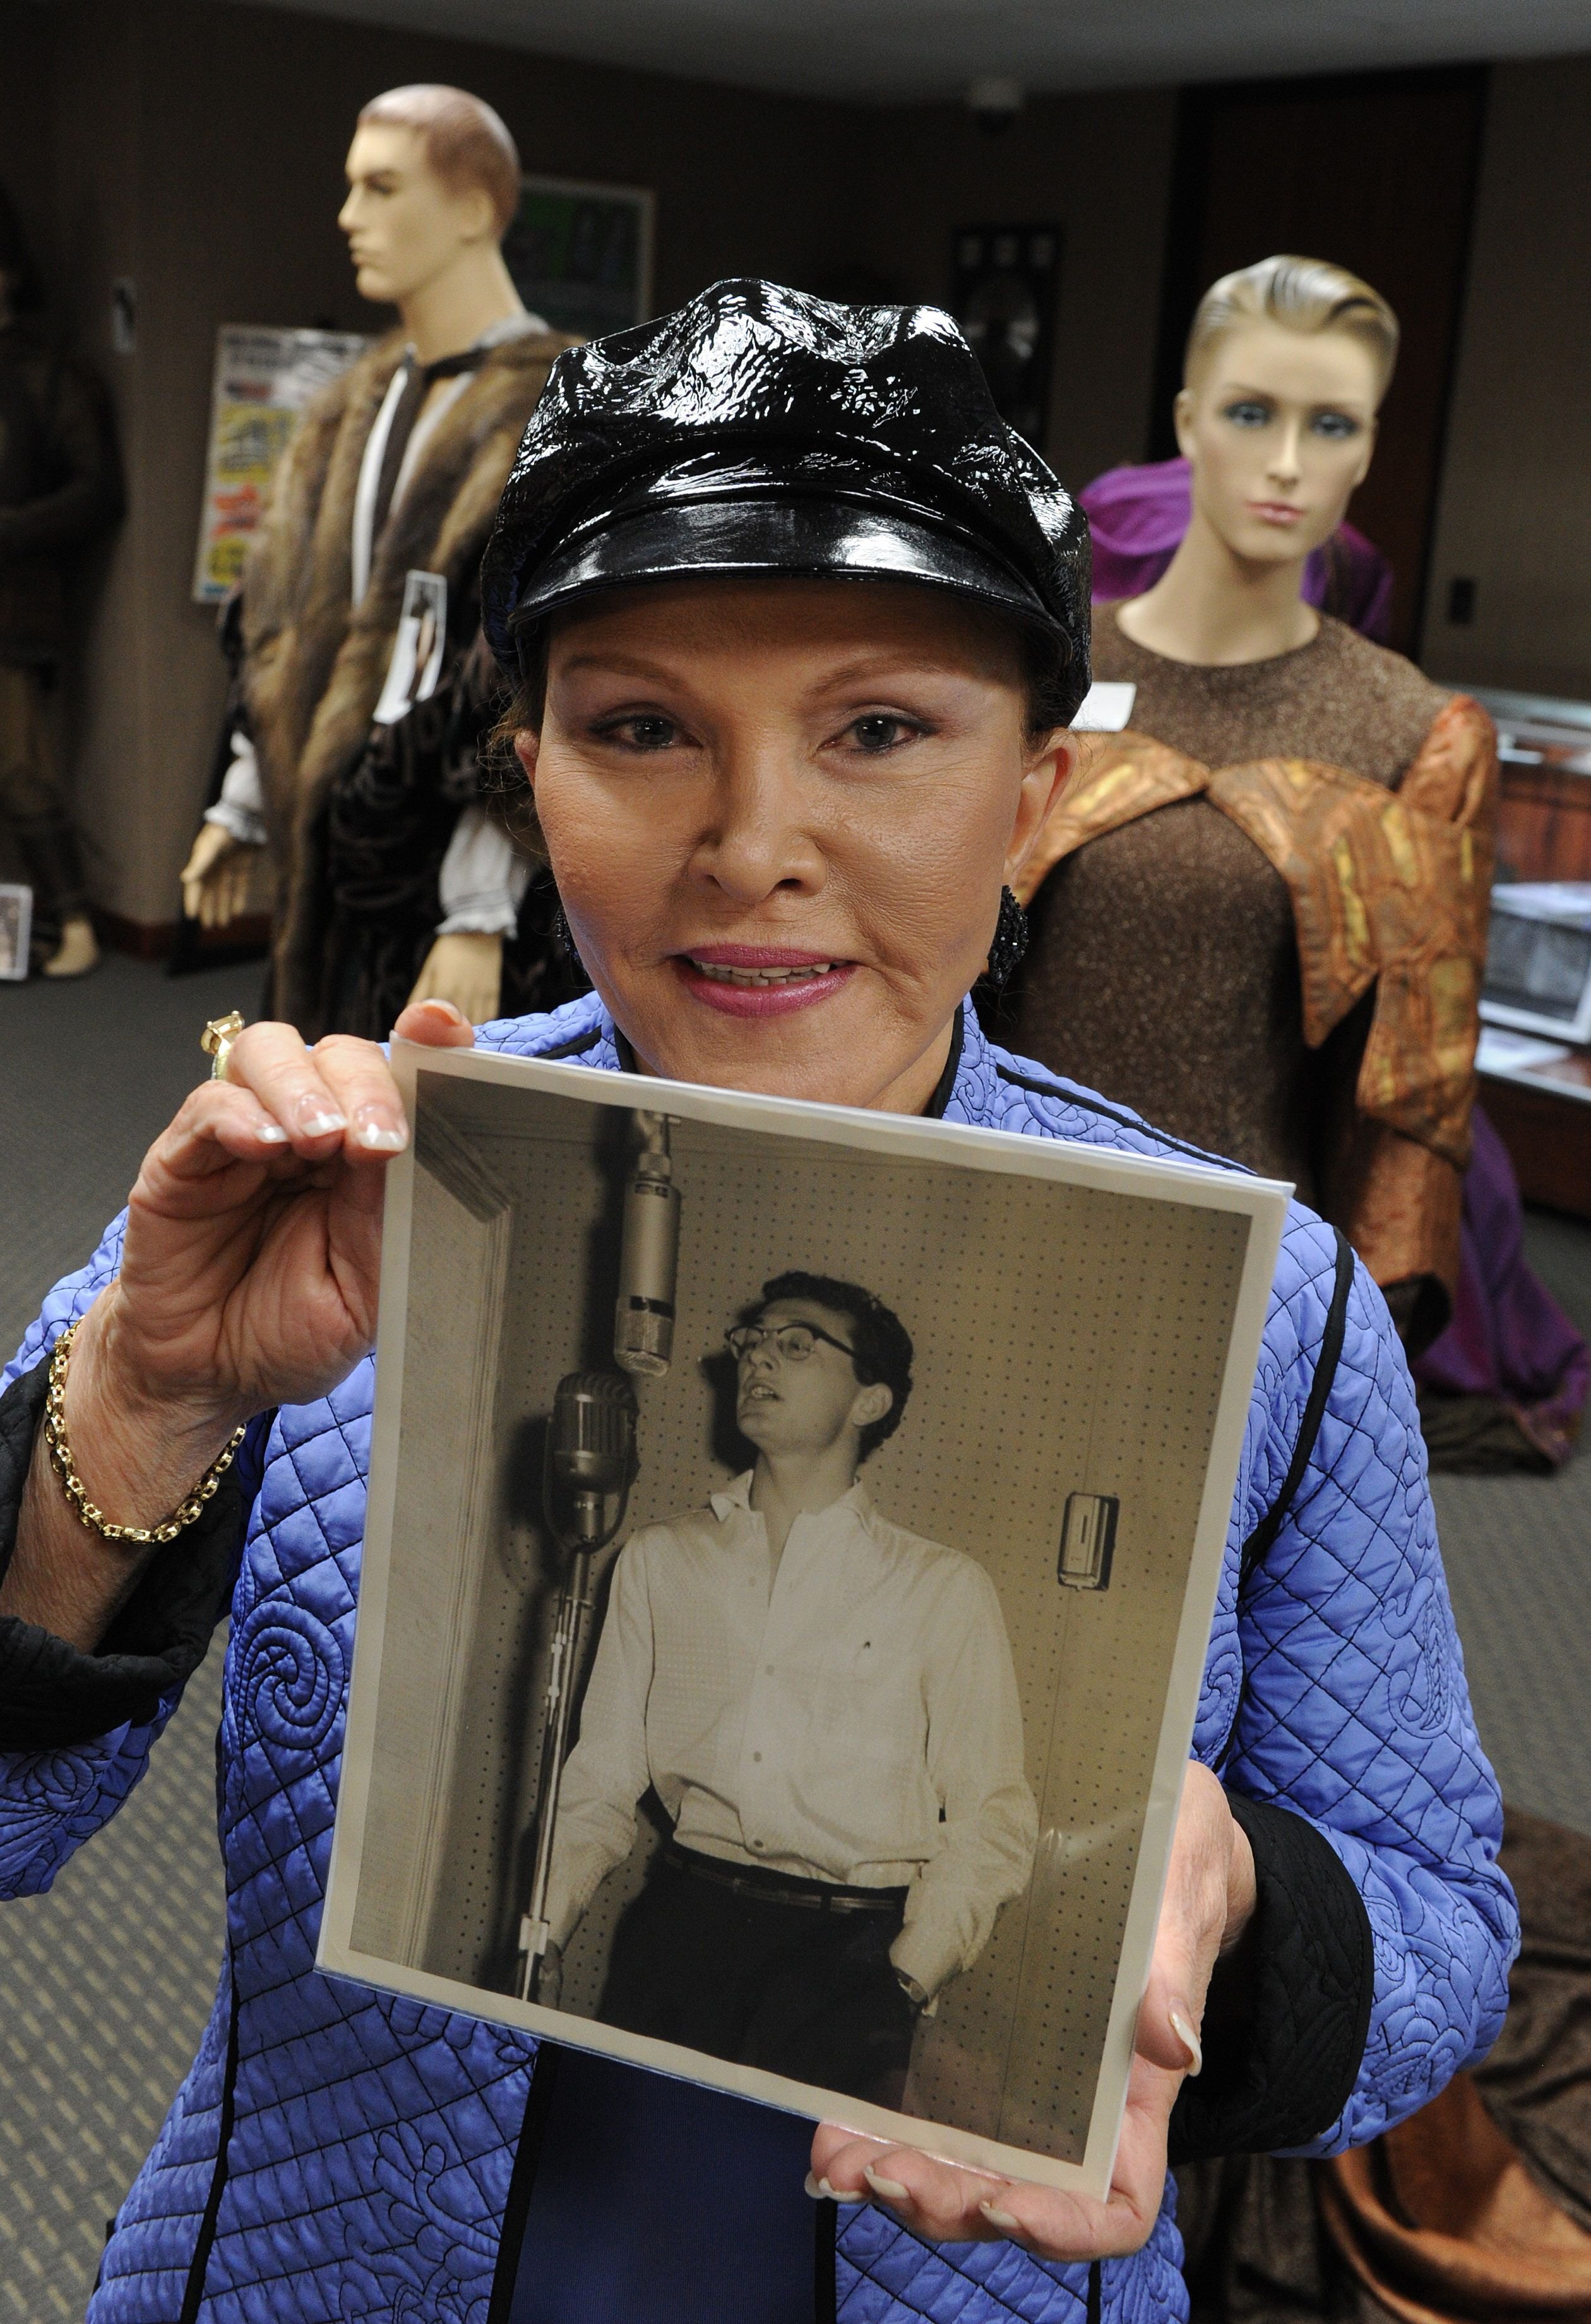 Maria Elena Holly holds a studio photo of Buddy Holly before an auction of the late singers memorabilia at the Heritage Auction Gallery in Beverly Hills on April 9, 2010. | Source: Getty Images